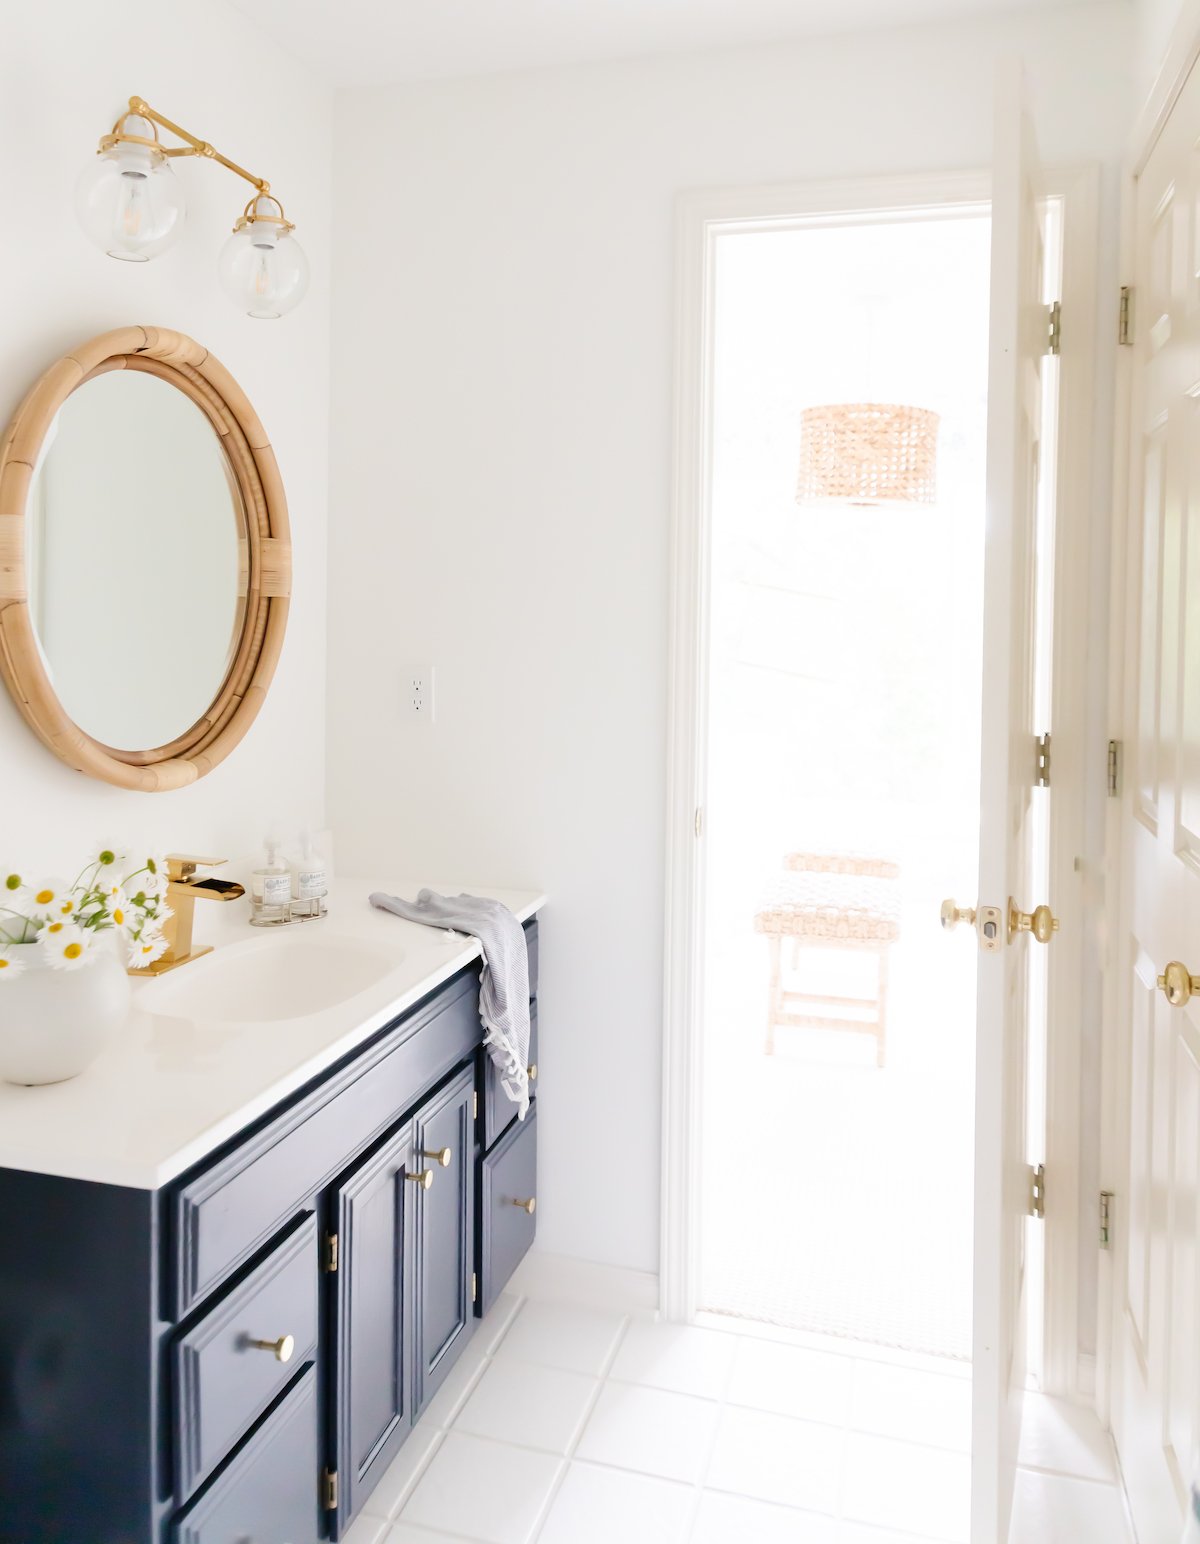 A white bathroom with a navy vanity and white tile floors with white grout paint.